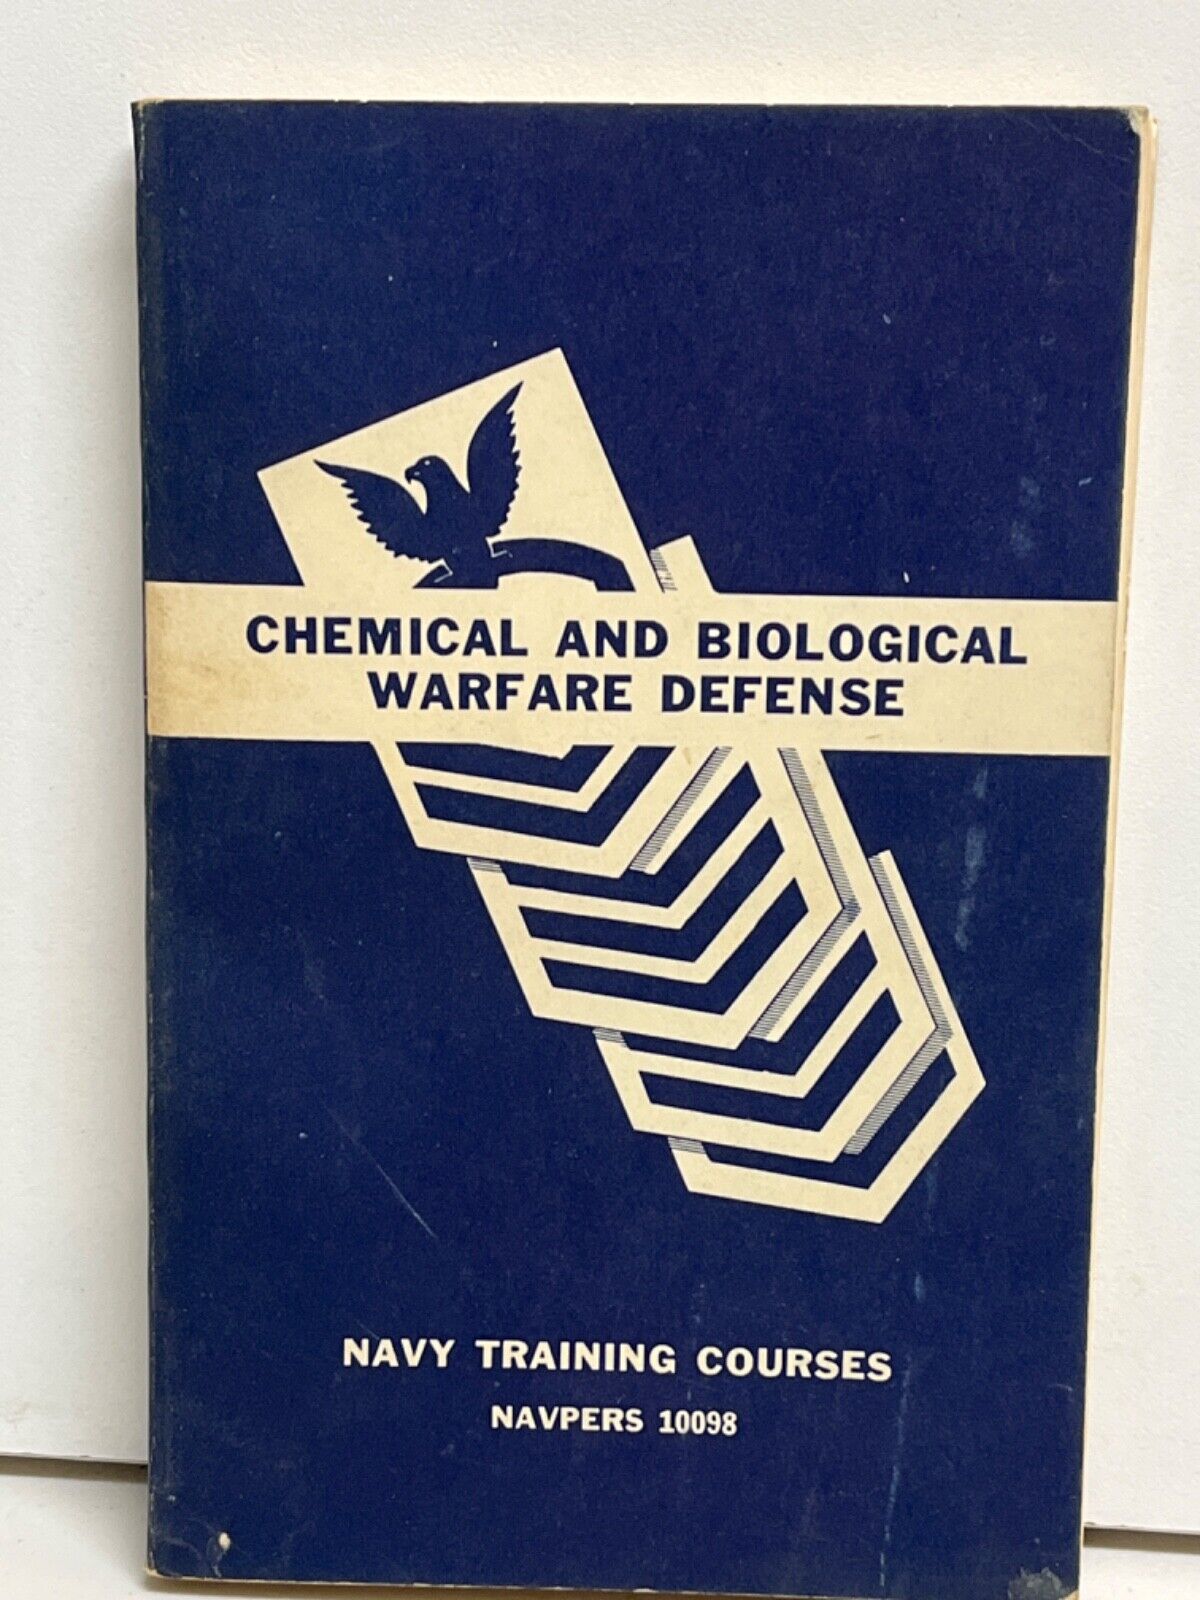 Chemical and Biological Warfare Defense, Book, Navy Training Courses, 1952,10098